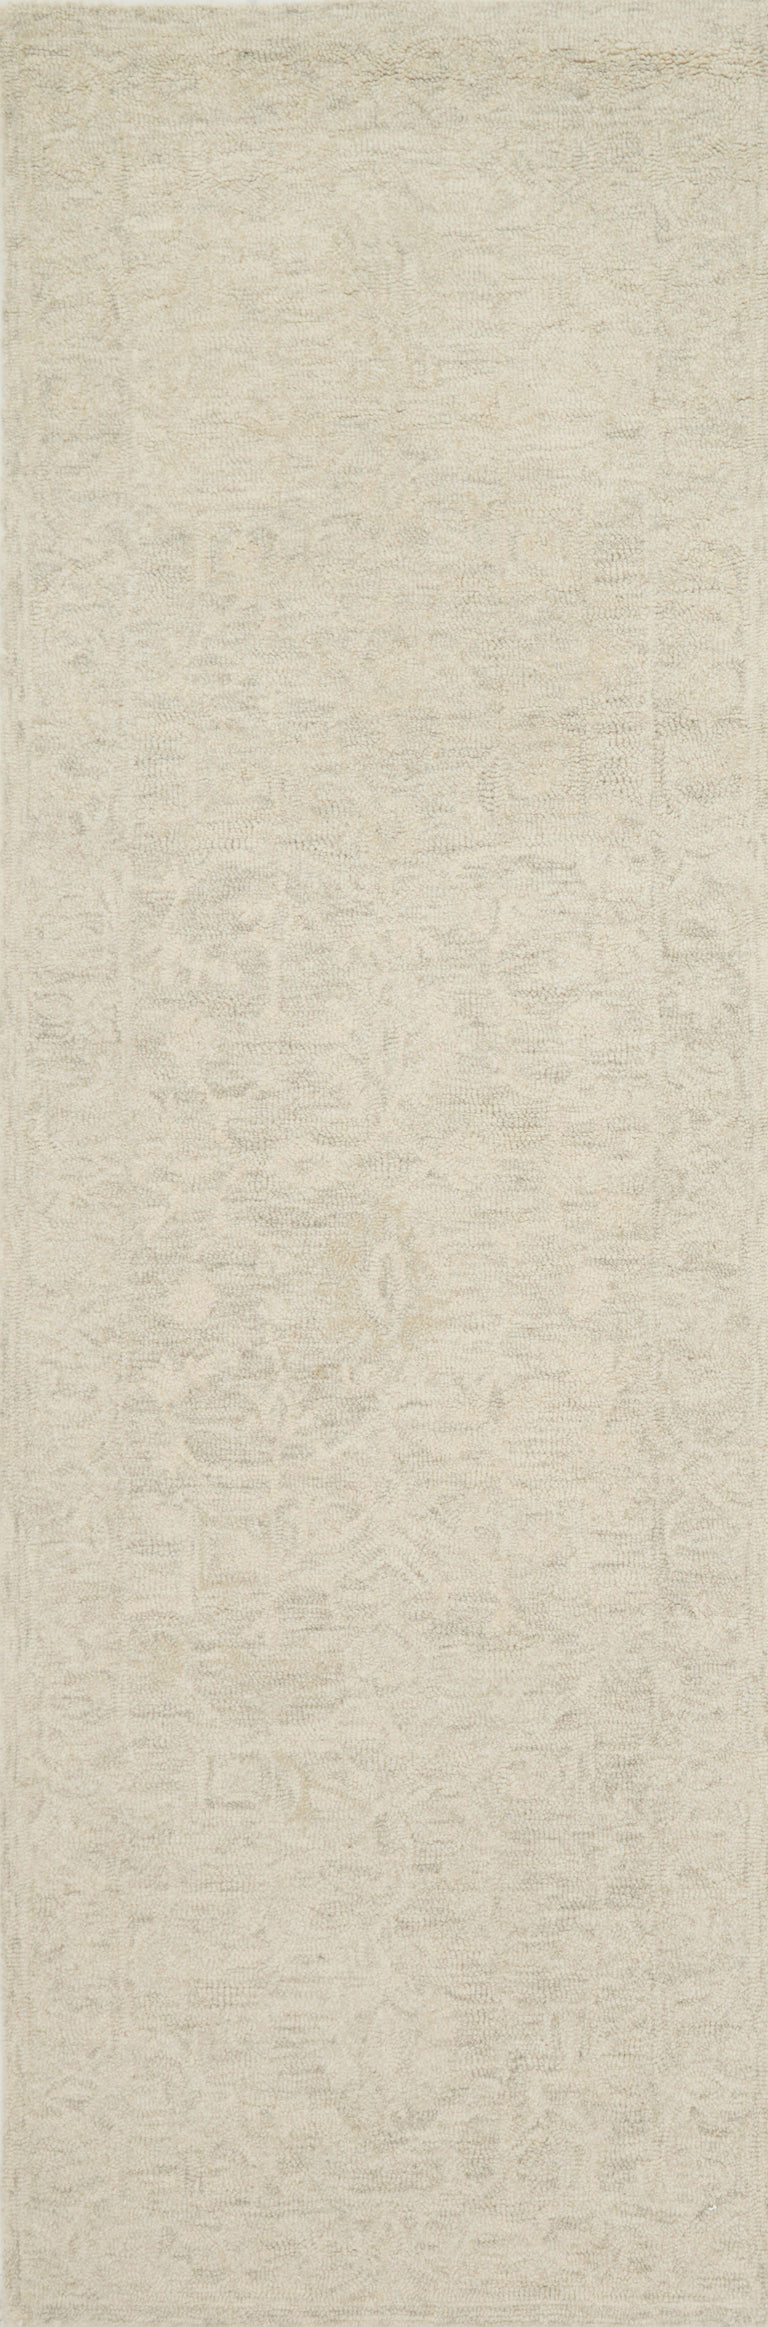 Loloi Rugs Lyle Collection Rug in Bone - 9'3" x 13'